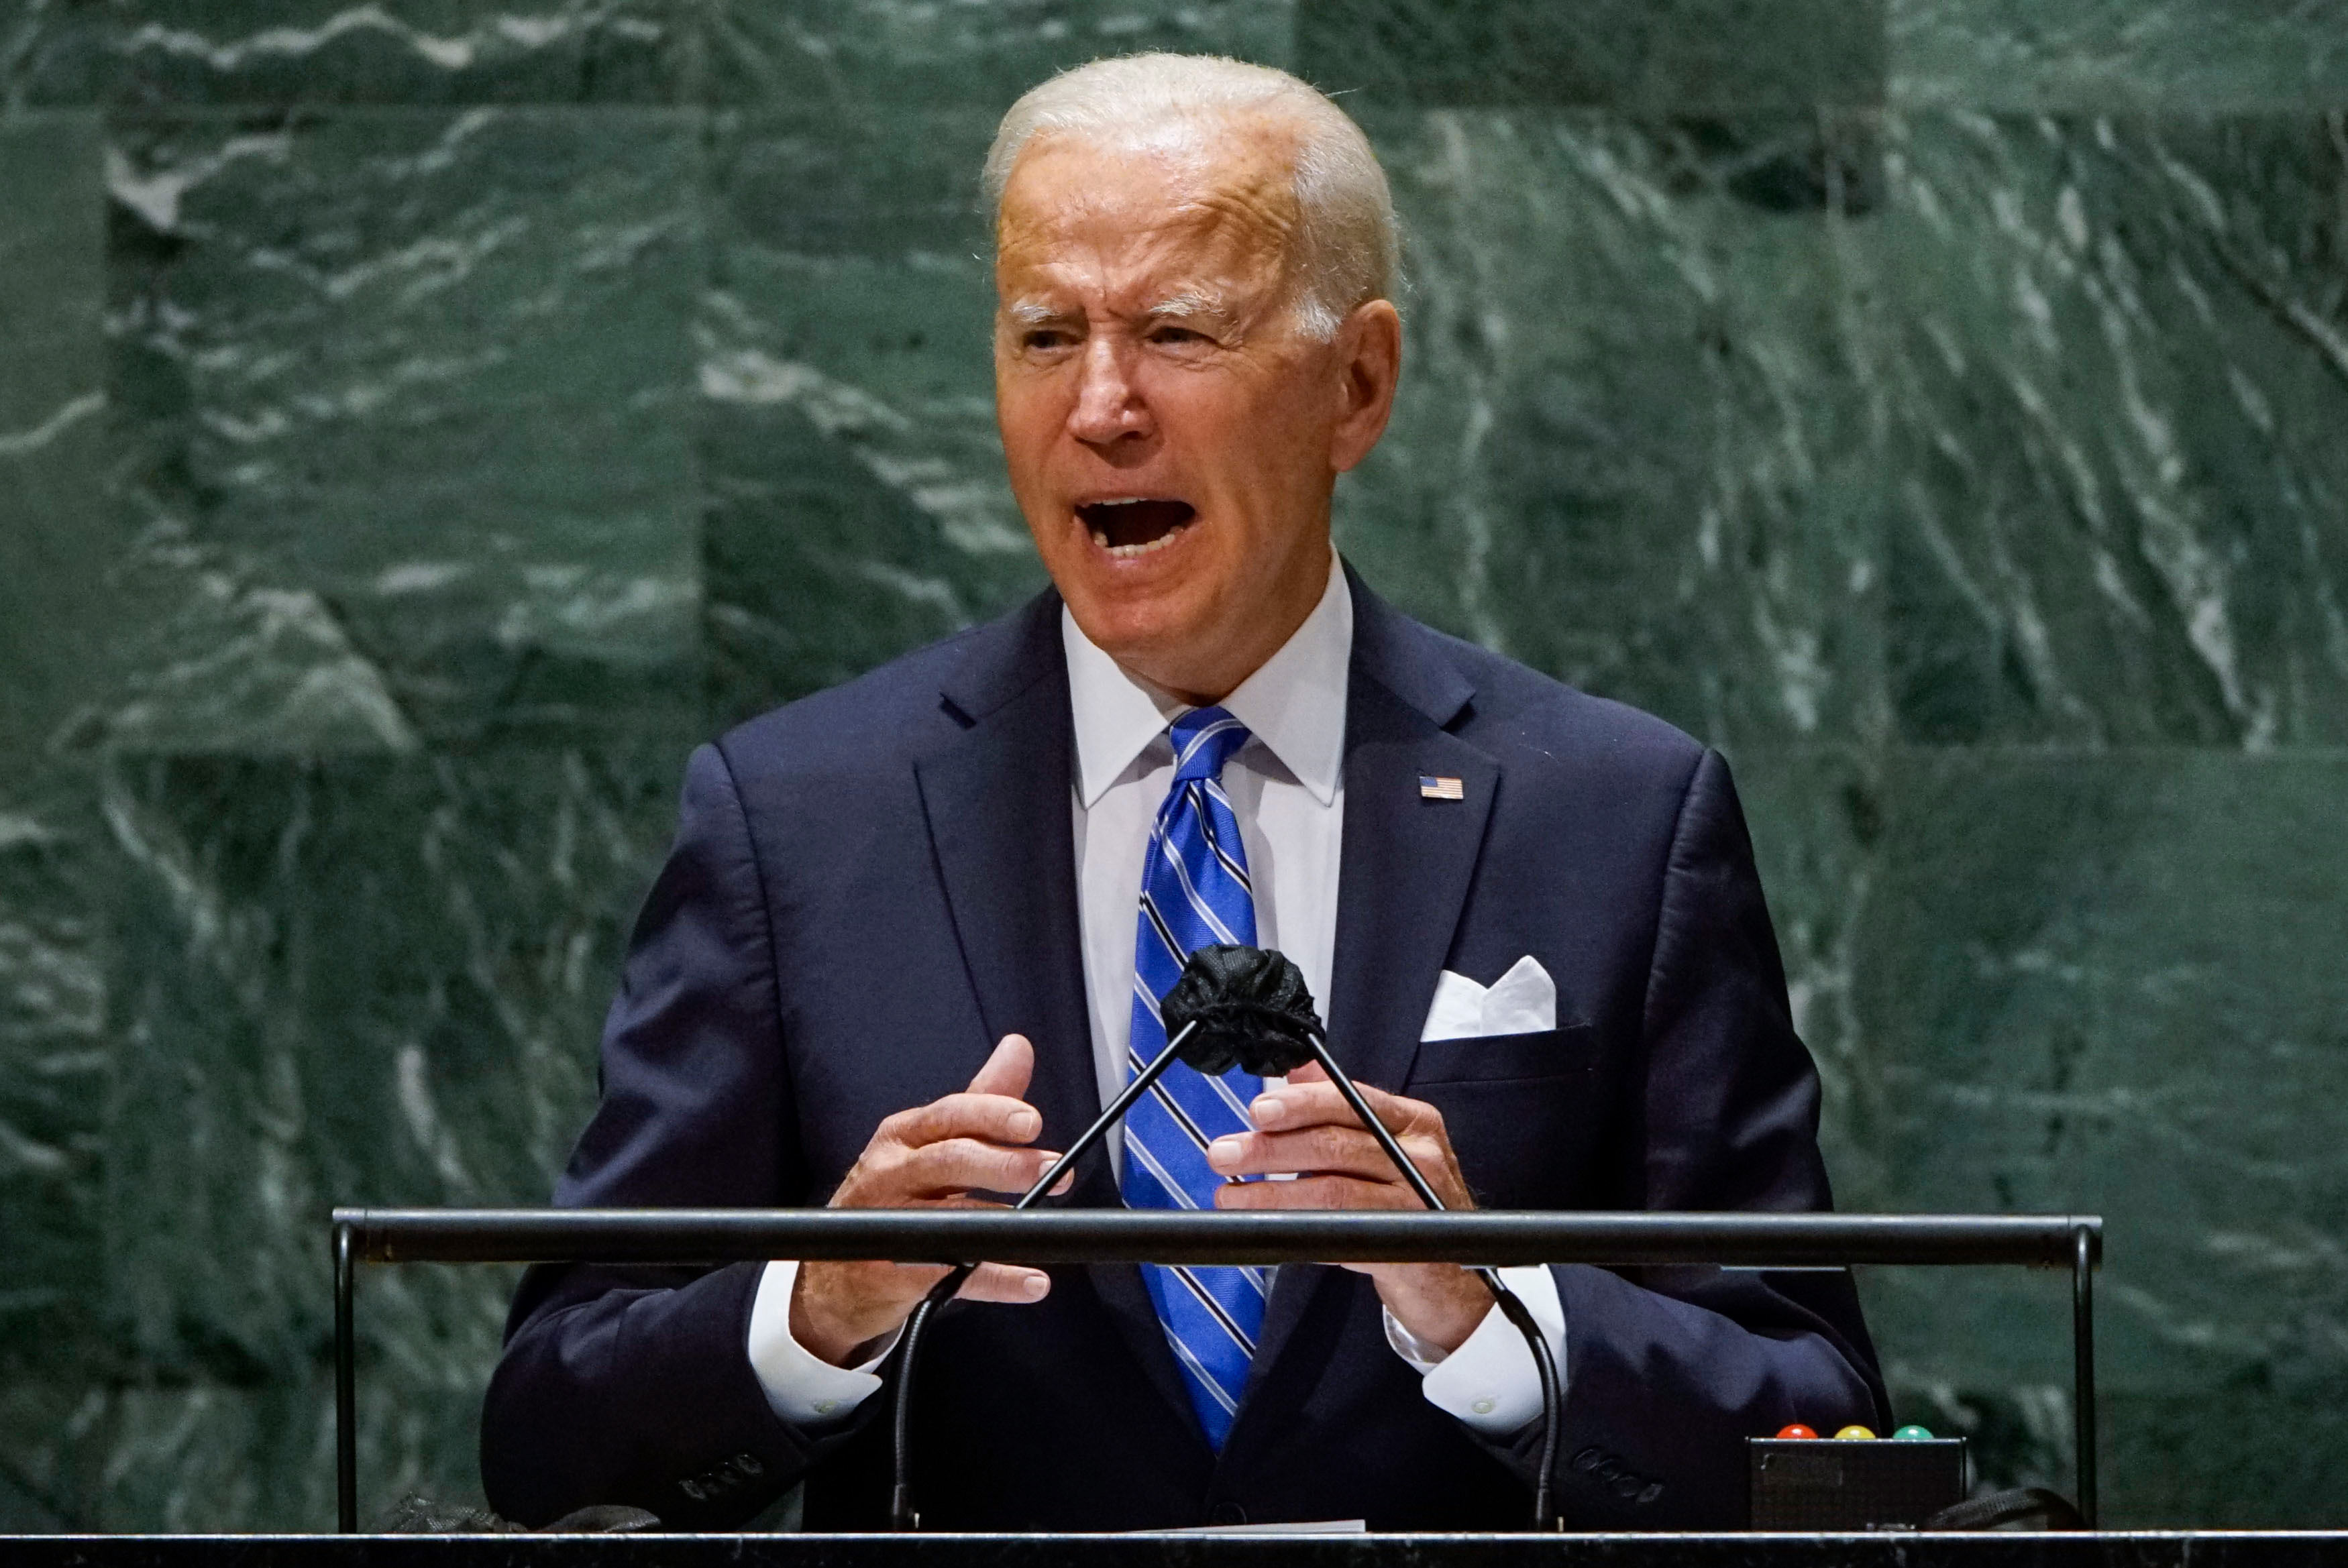 President Joe Biden detailed his vision for leading the United States into a new era of diplomacy as he sought to reassure allies - some freshly skeptical - he was moving past the "America First" era of foreign policy.